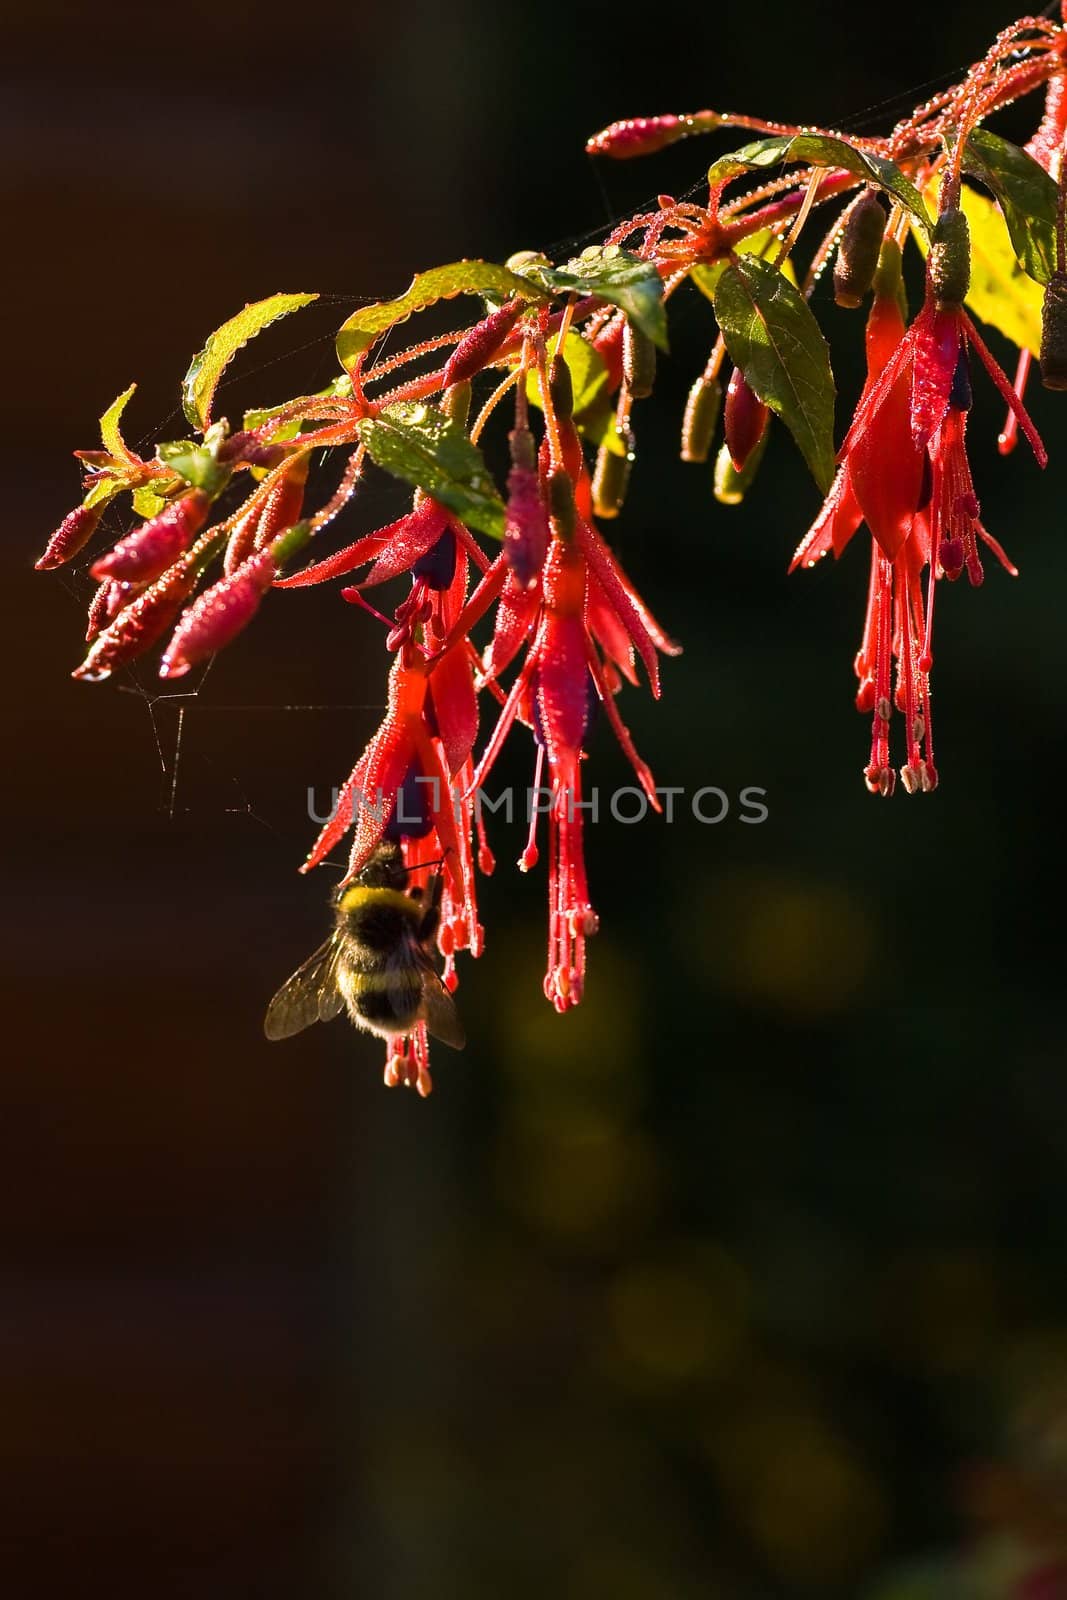 Bumble bee on Fuchsia flowers by Colette